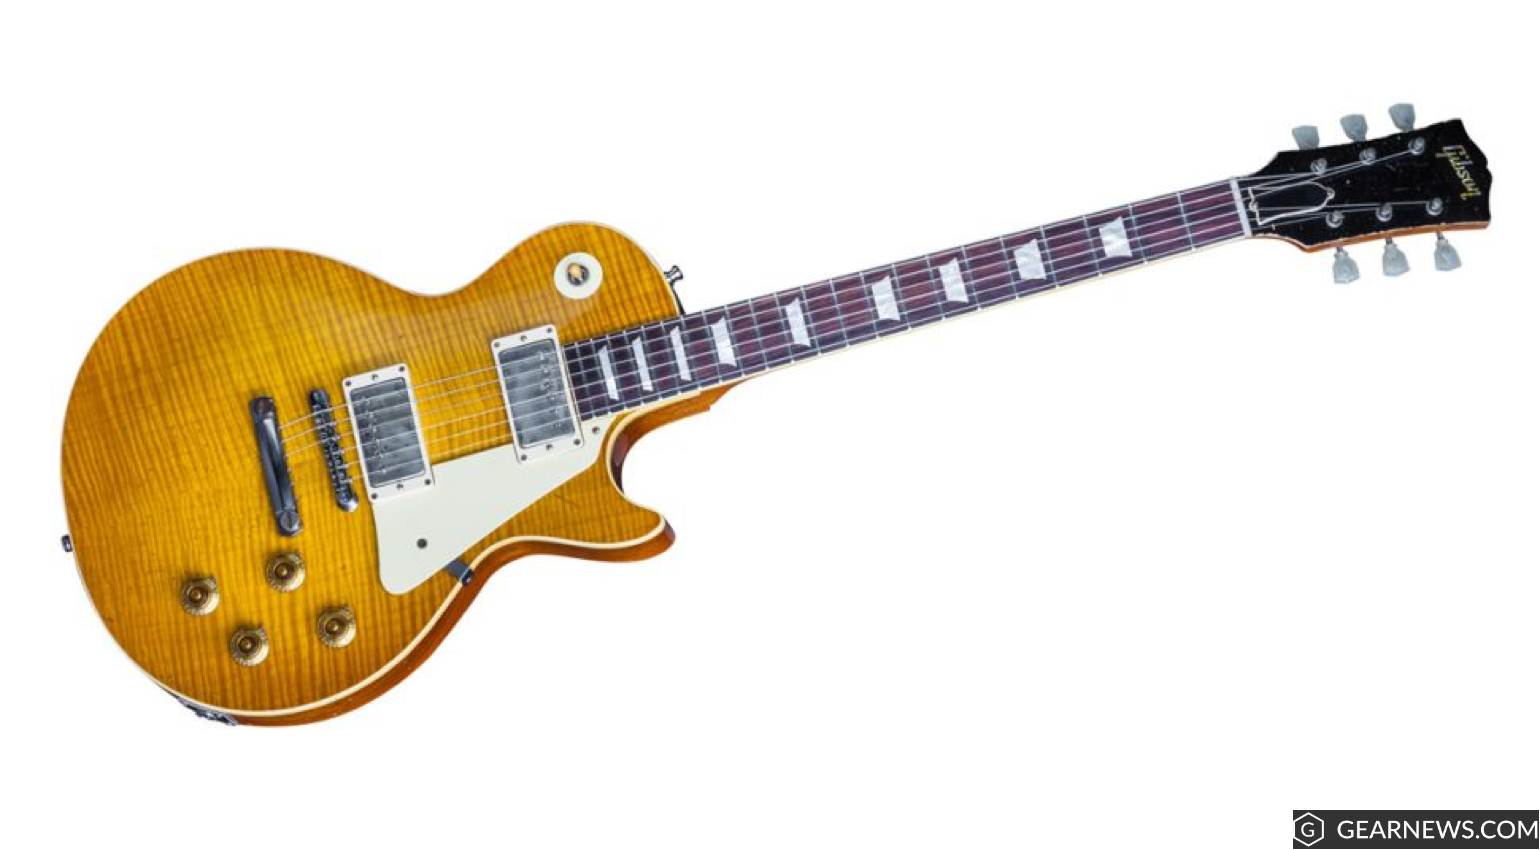 120807-Gibson-guitars.png (51